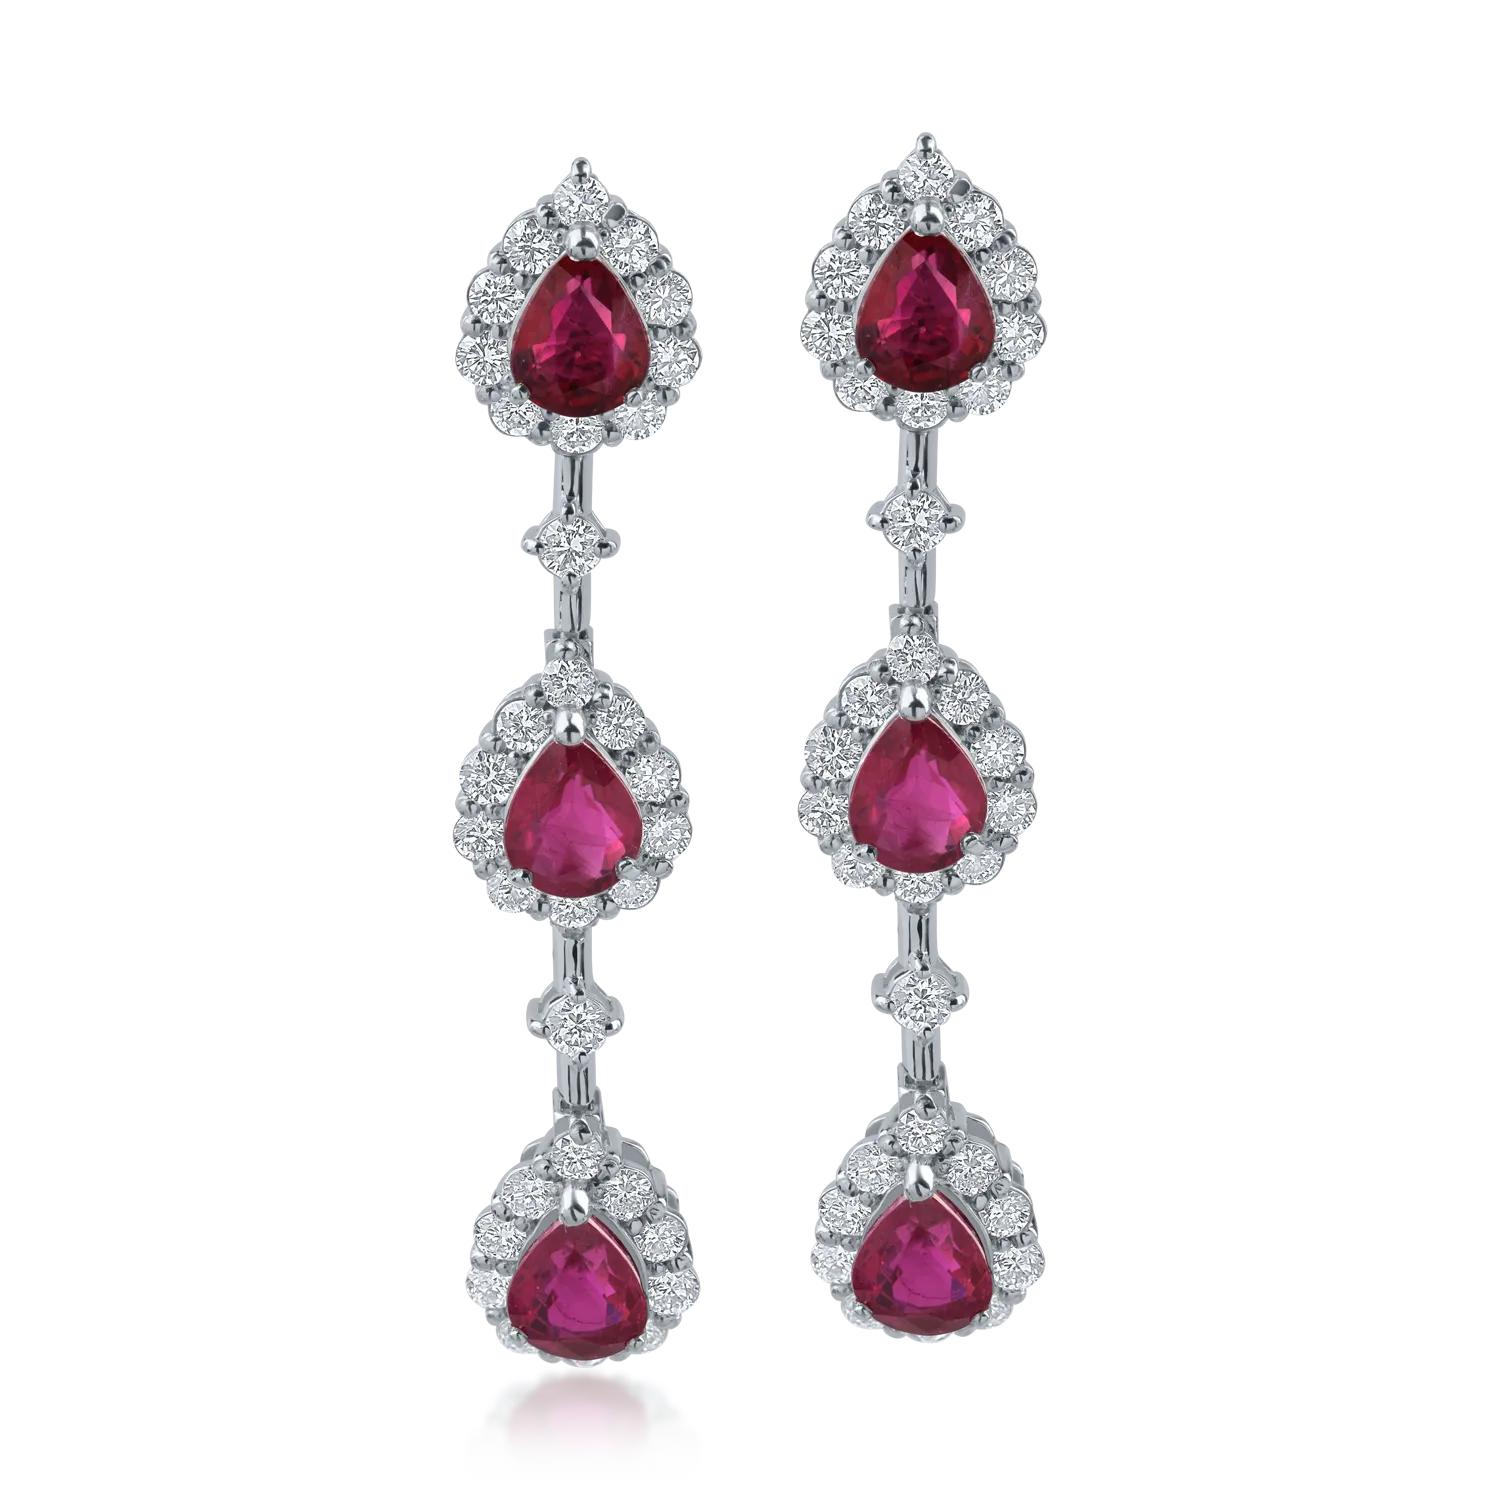 Platinum earrings with 2.83ct rubies and 1.12ct diamonds